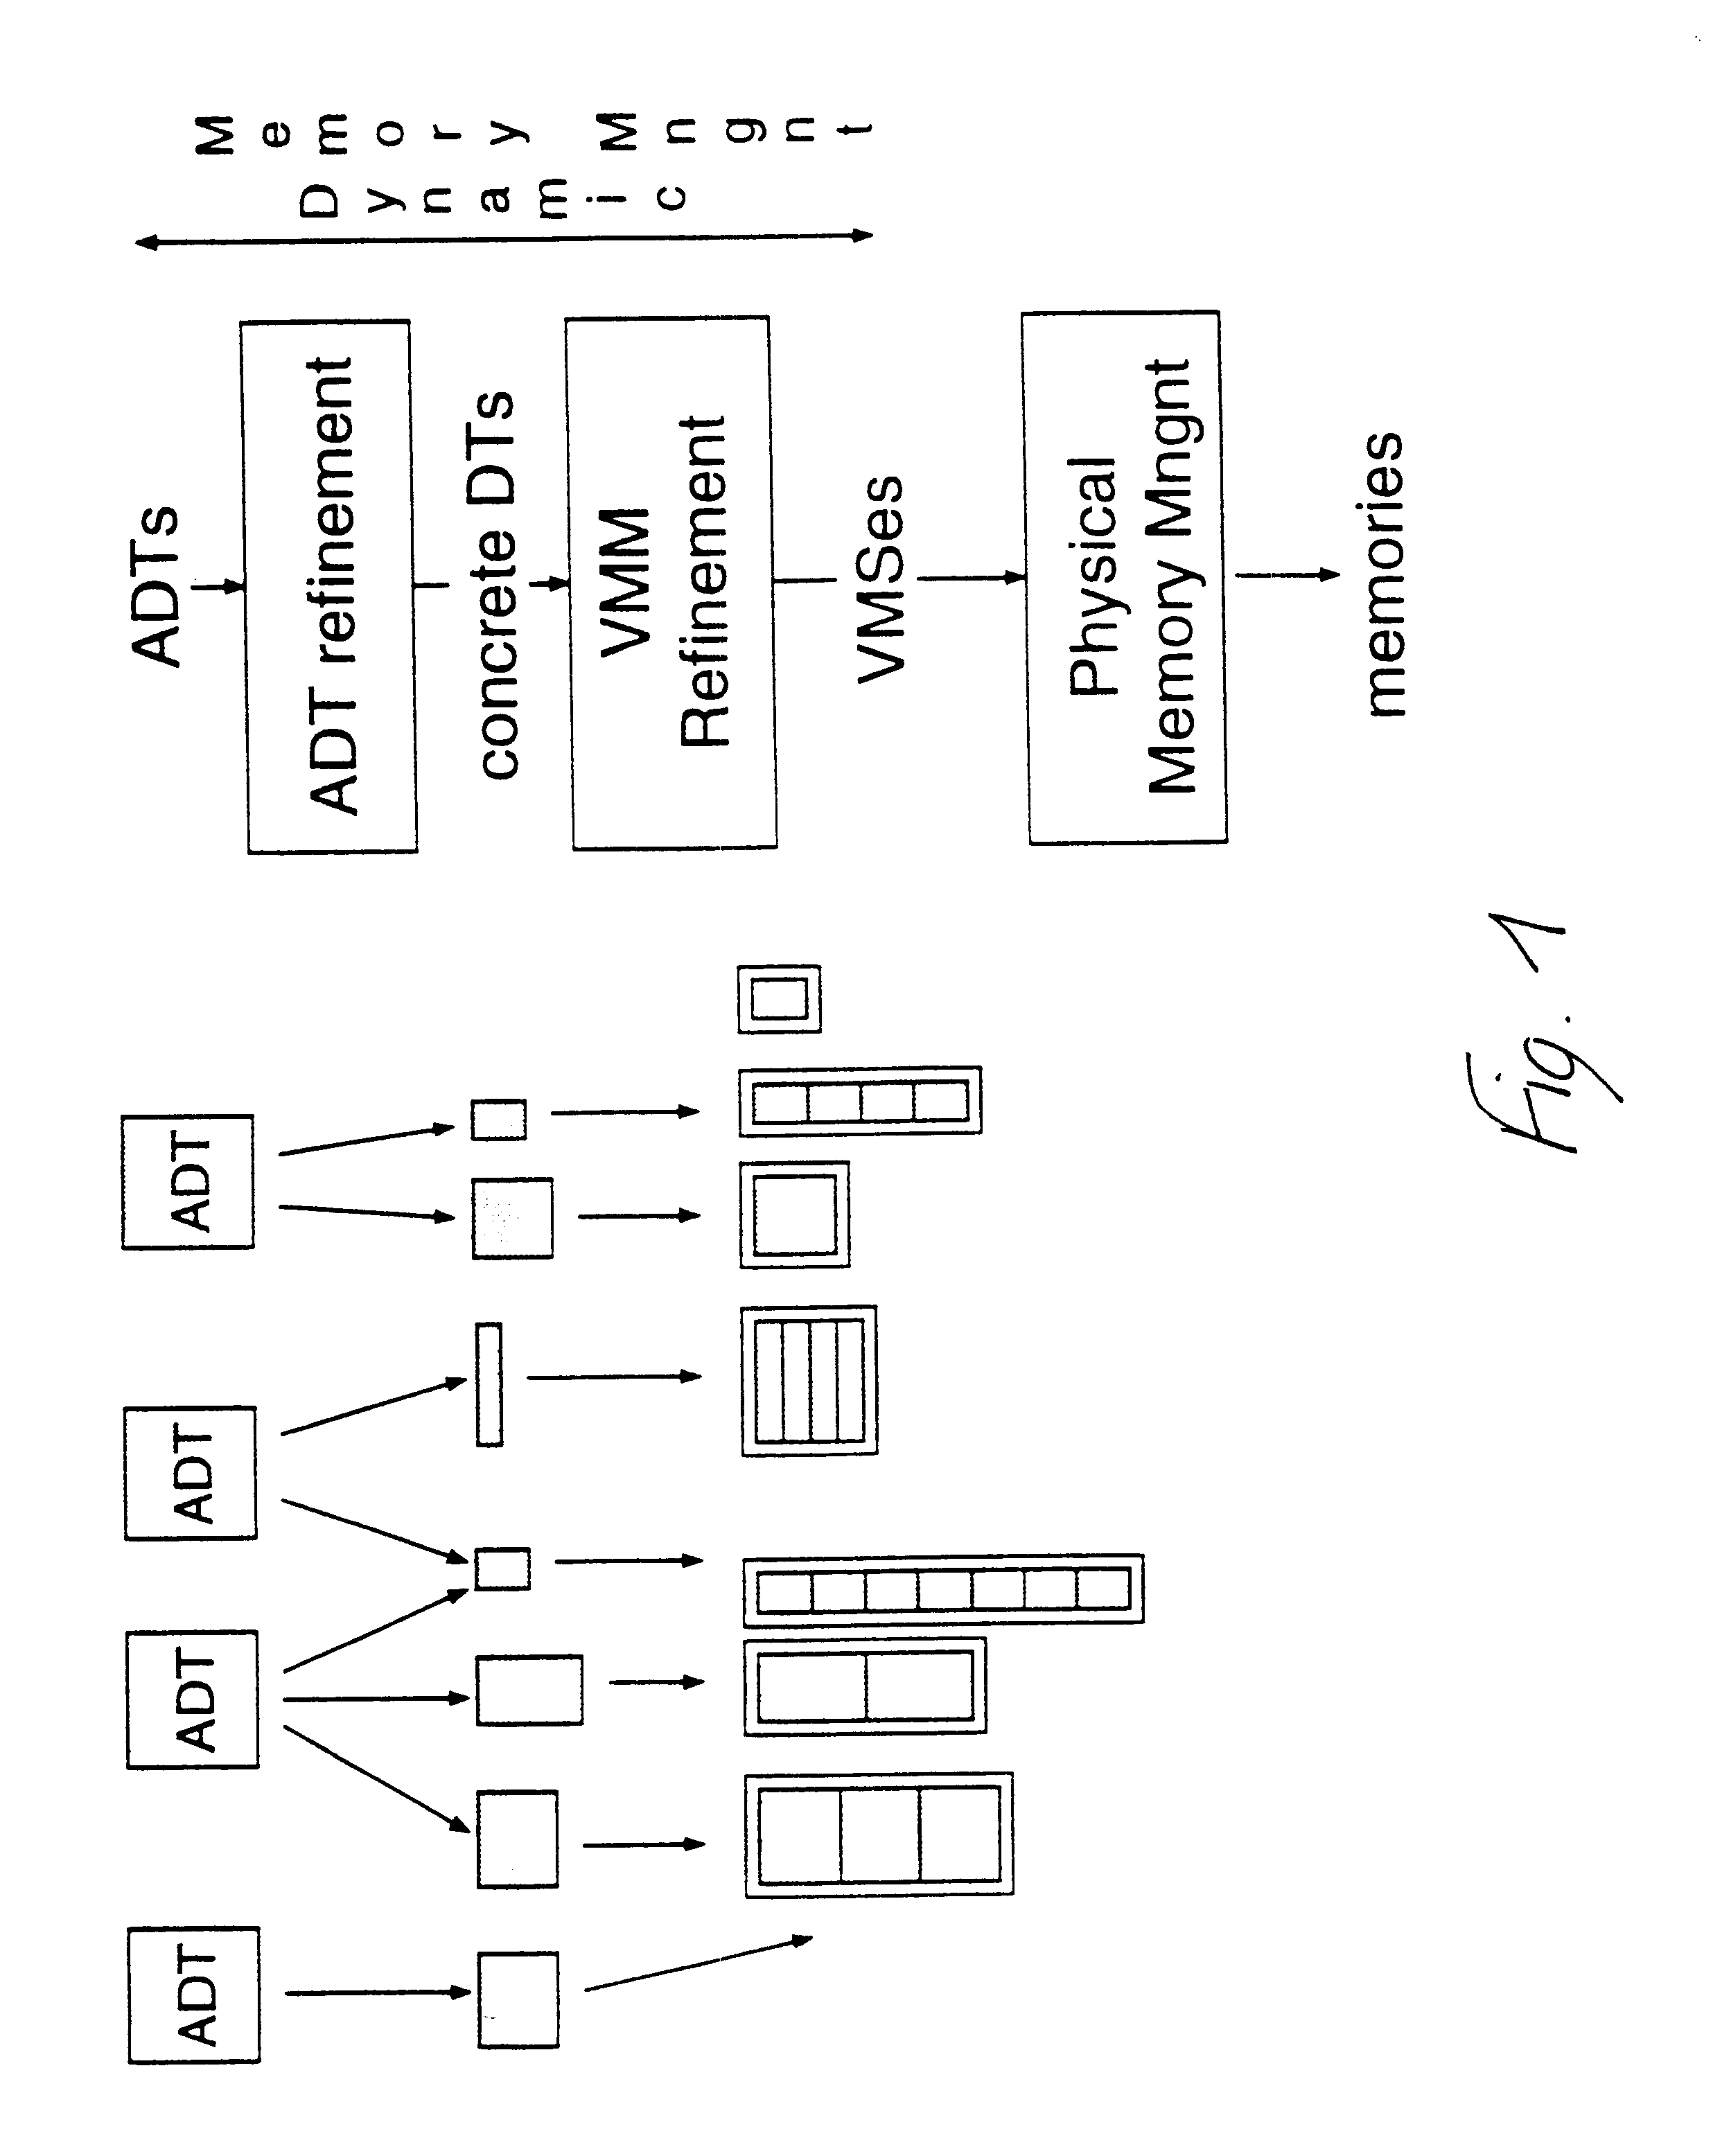 Optimized virtual memory management for dynamic data types